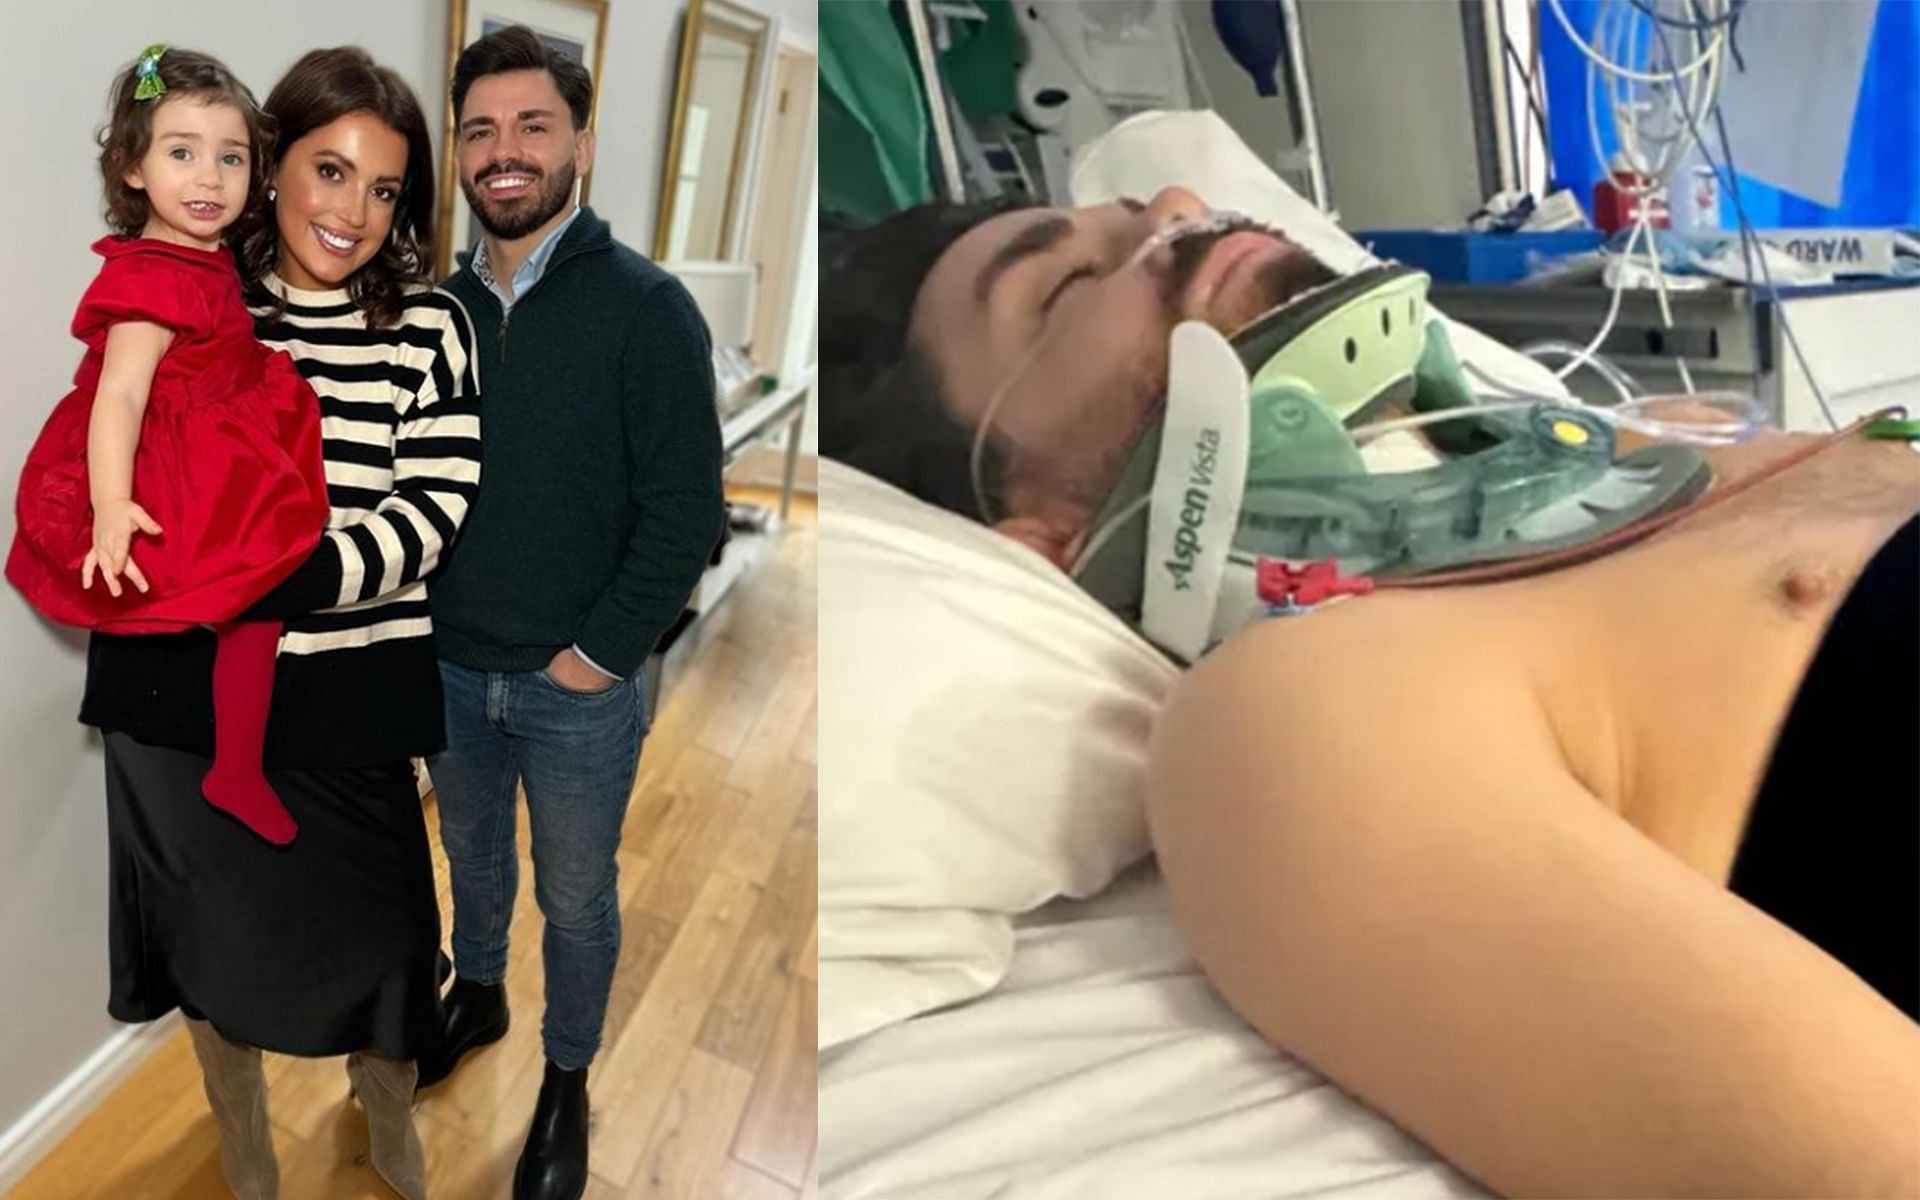 Ryan Curtis with his partner Emma and daughter (left) has been in the ICU (right) since the accident (Images Courtesy: @emzac_ Instagram and gofundme